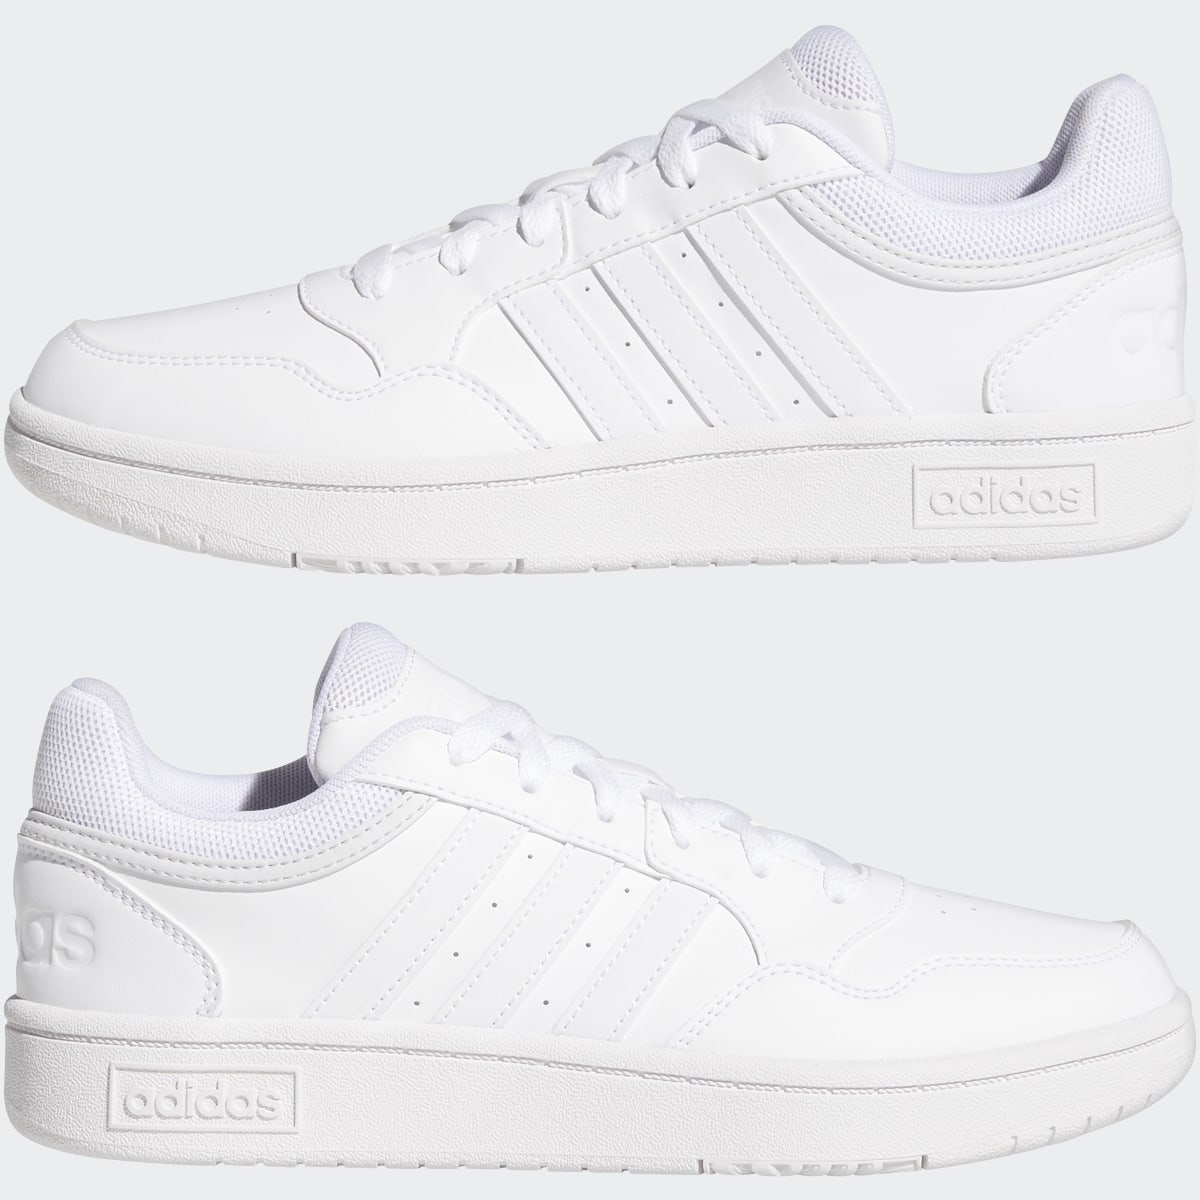 Adidas Hoops 3.0 Low Classic Shoes. 10